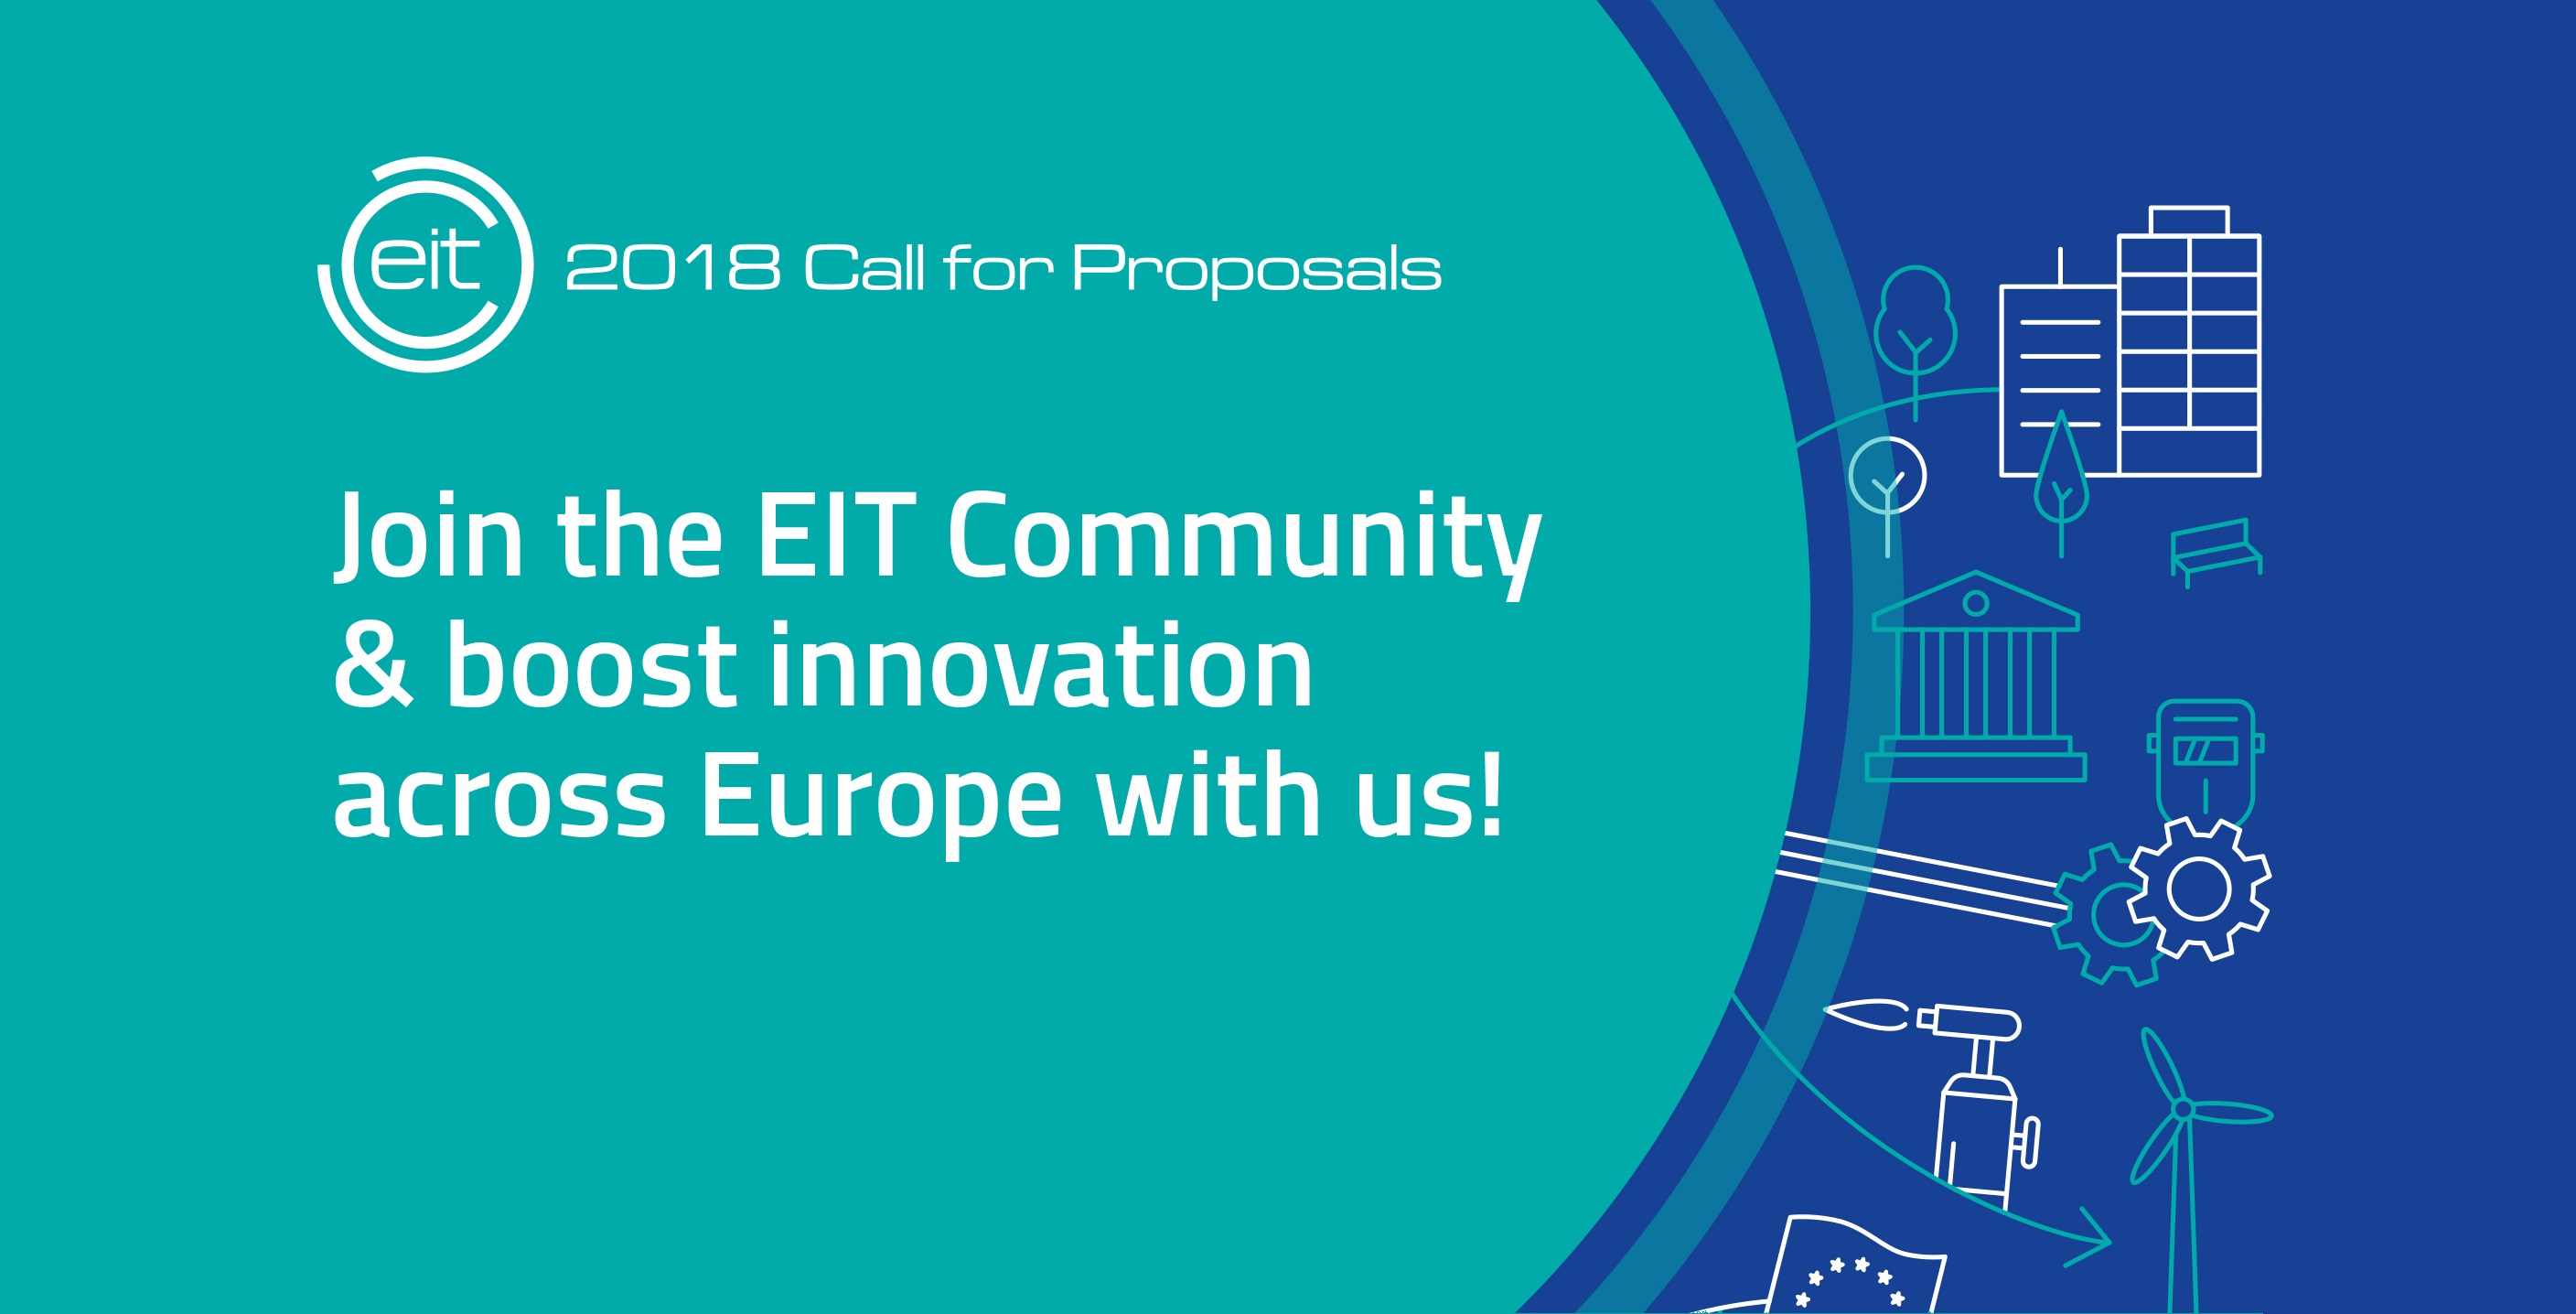 Framework of Guidance for the EIT’s 2018 Call for Proposals published